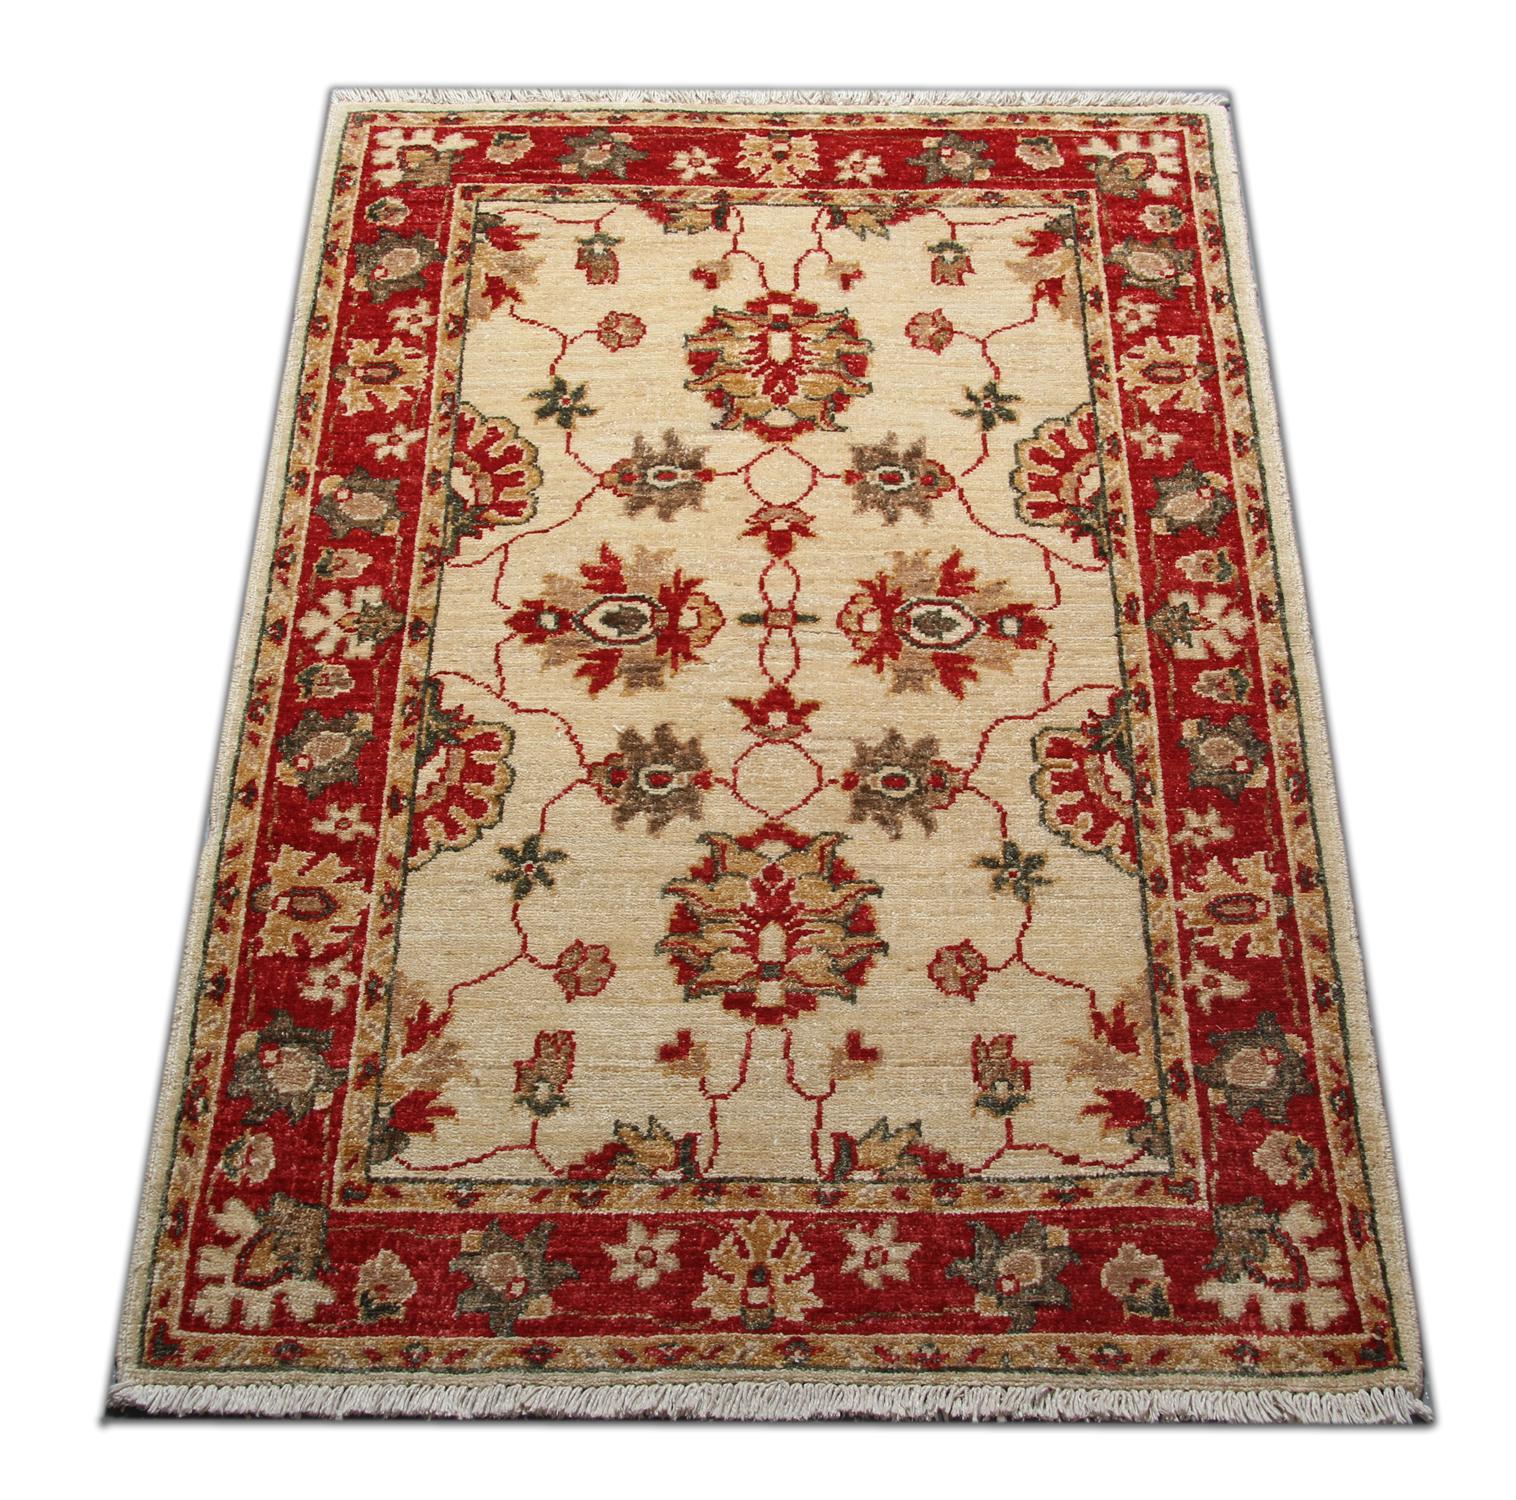 This rug is a Ziegler rug made on our looms by our master weavers in Afghanistan, Sultanabad. Featuring meandering floral patterns in colors of red and beige. The large-scale design makes Sultanabad designs regarded as the most appealing to European